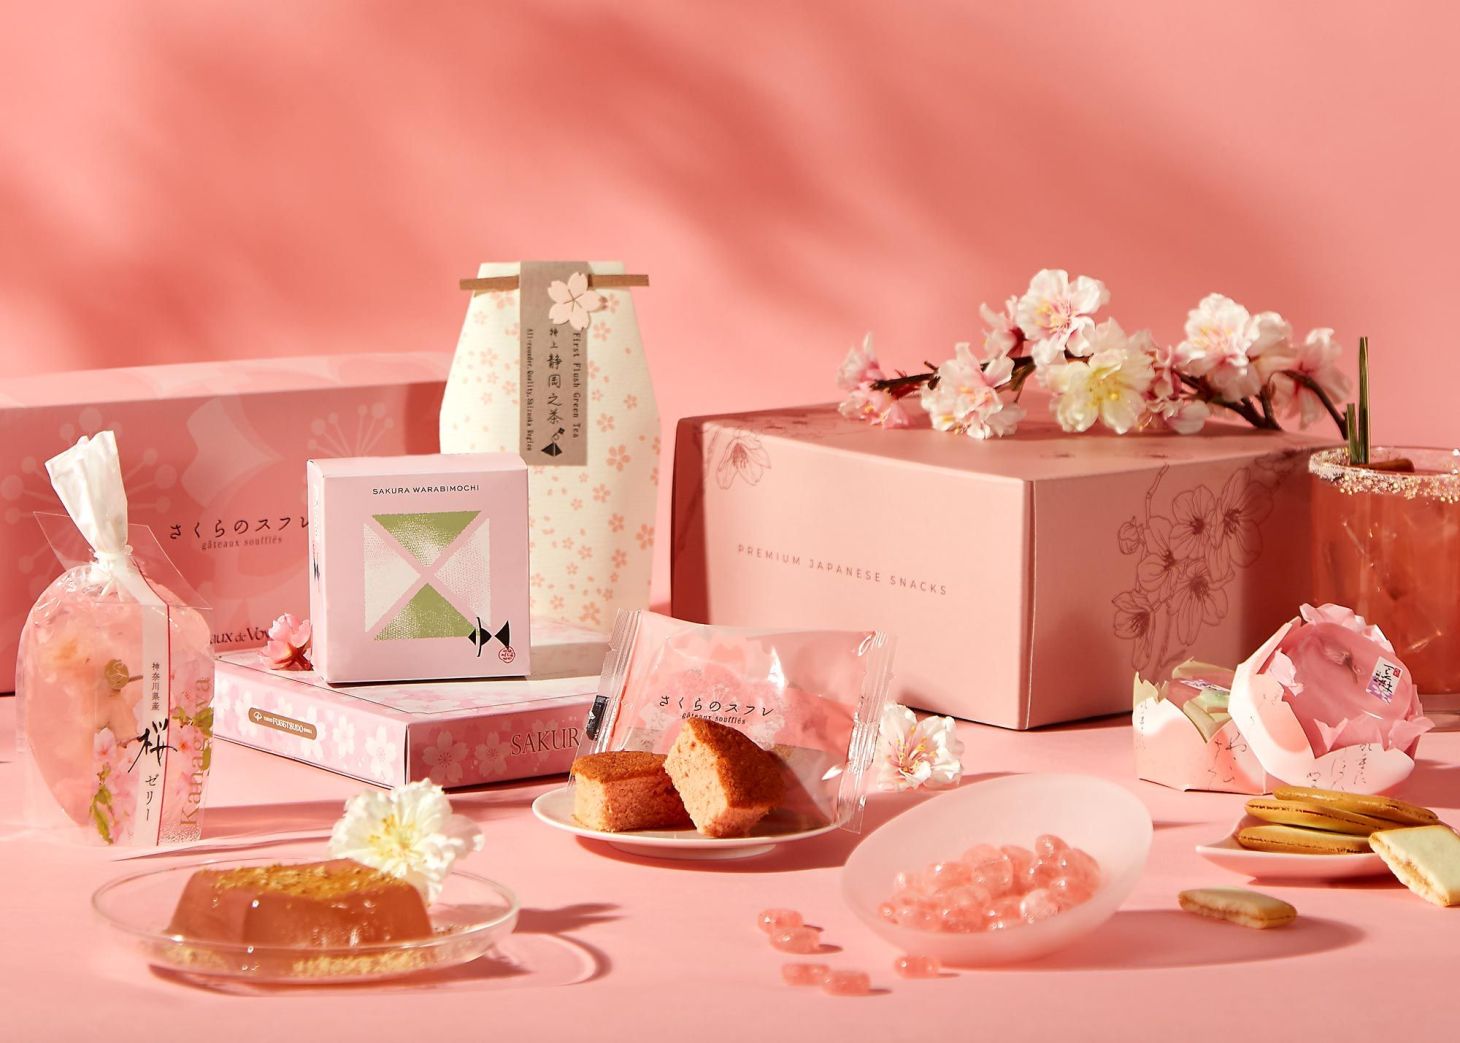 bokksu box, a mother's day food gift